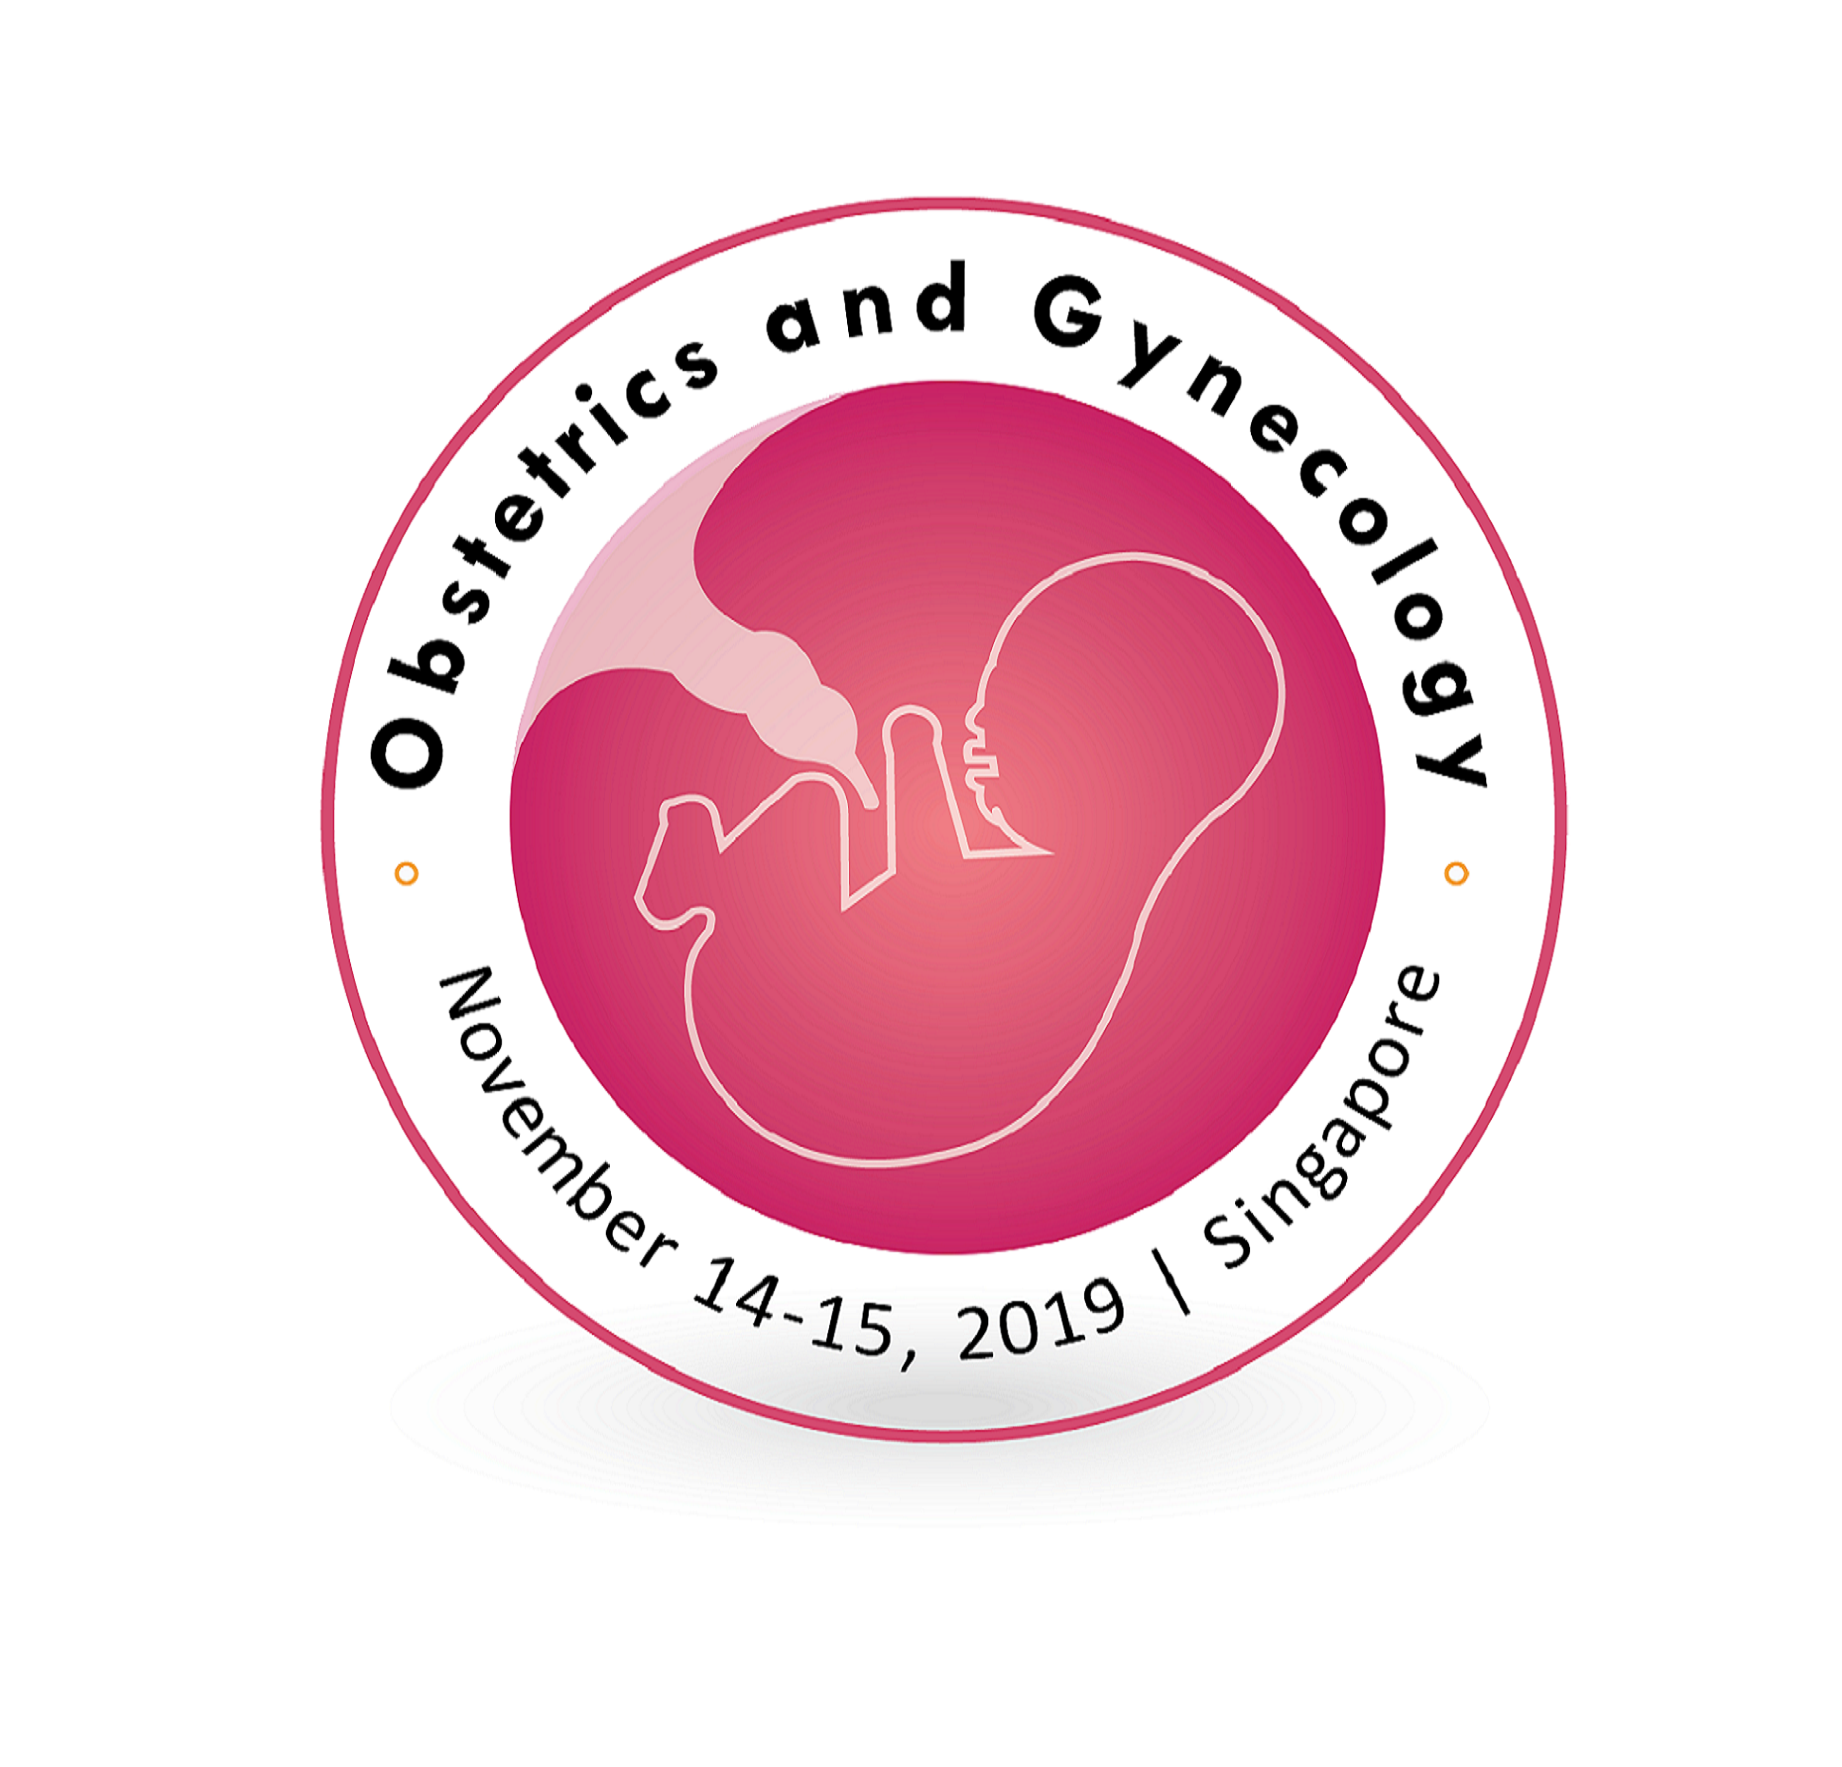 4th International Conference on Obstetrics and Gynecology 